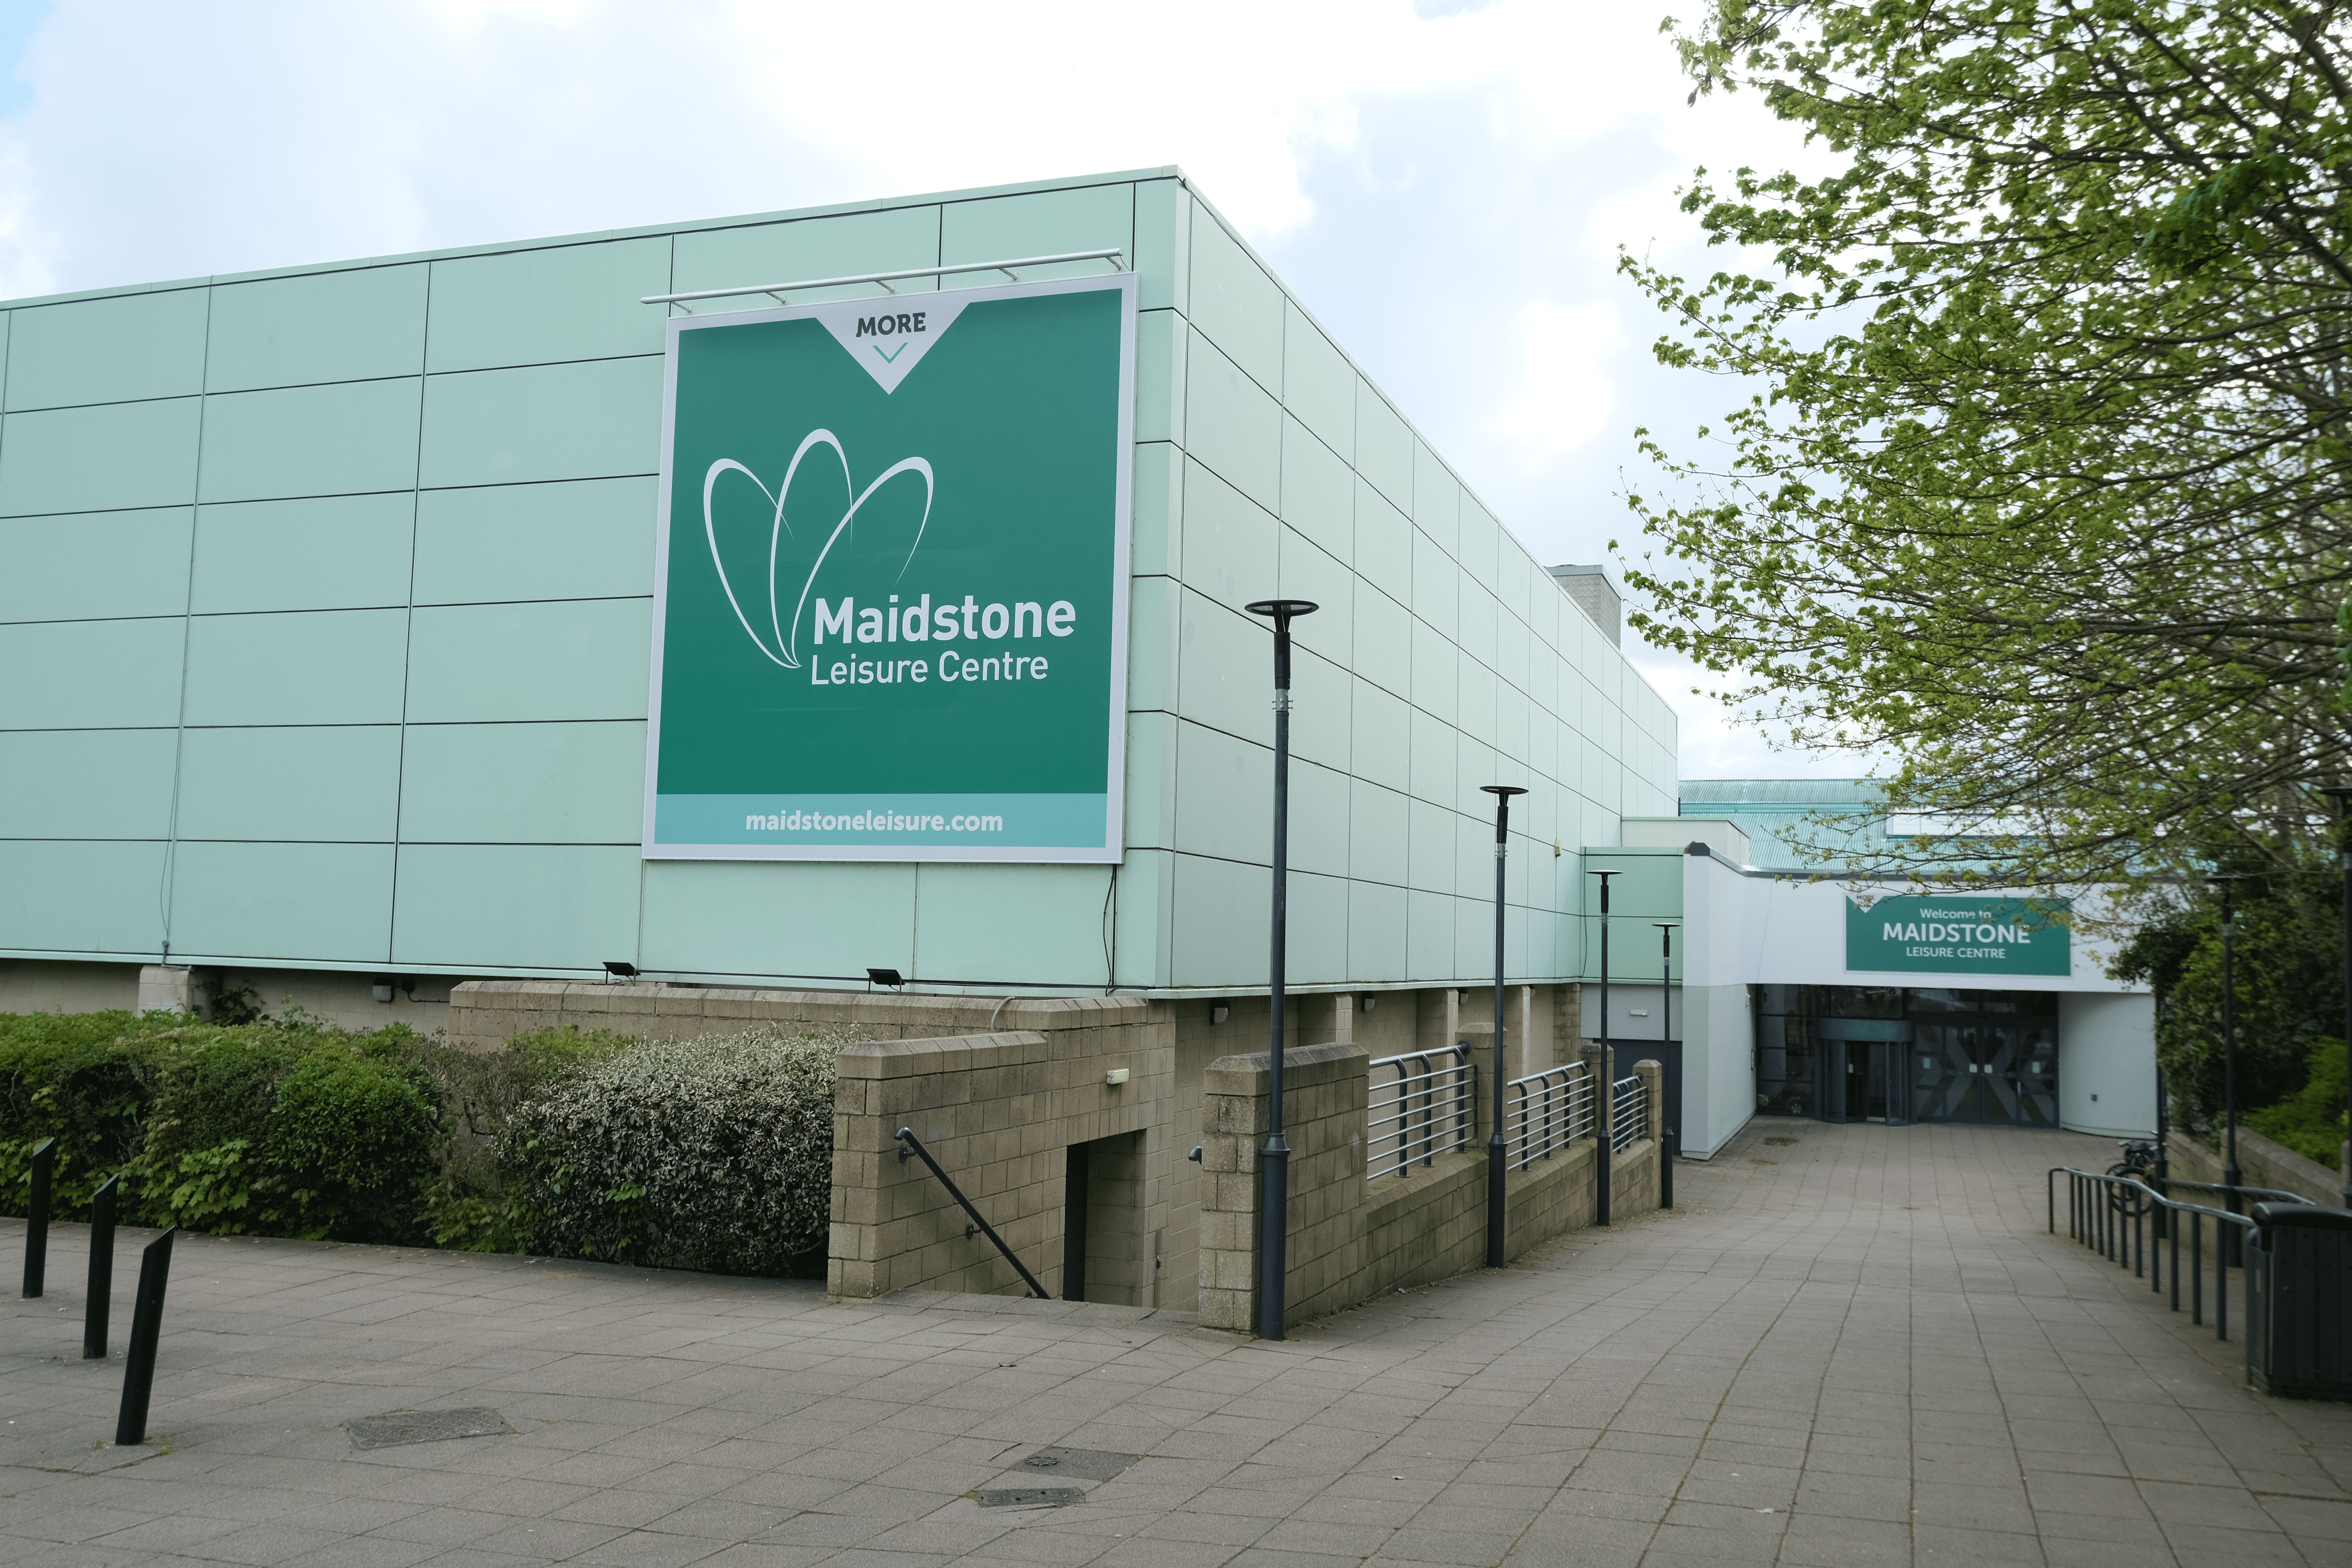 Sport England funding for Maidstone Leisure Centre image